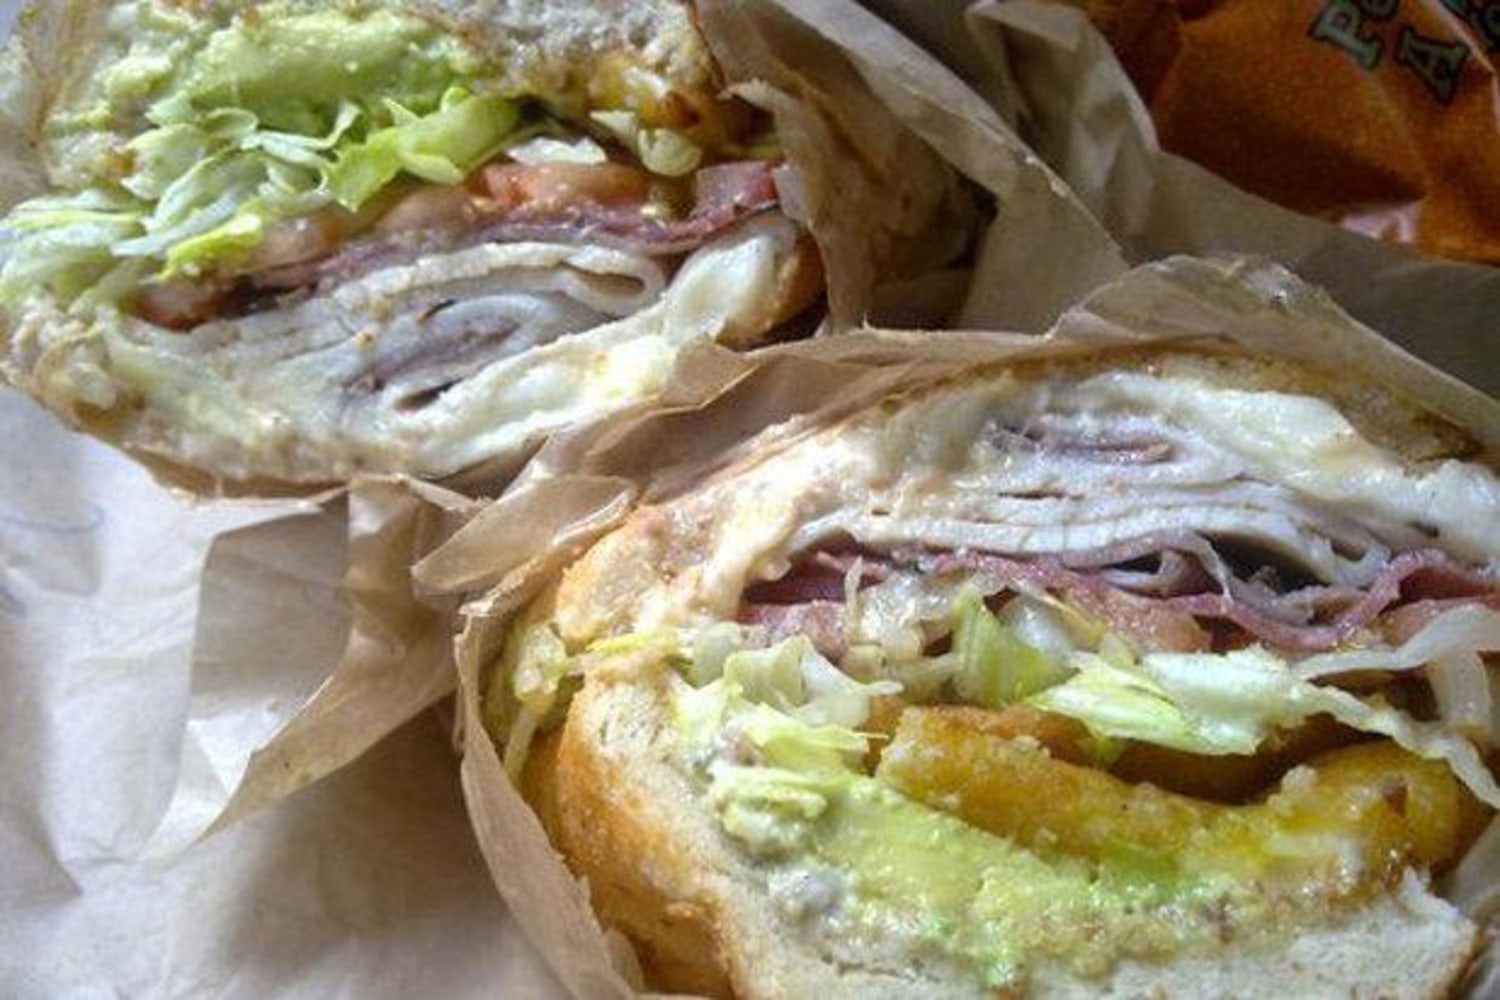 Beyond the Jetbow: 5 athlete-inspired sandwiches